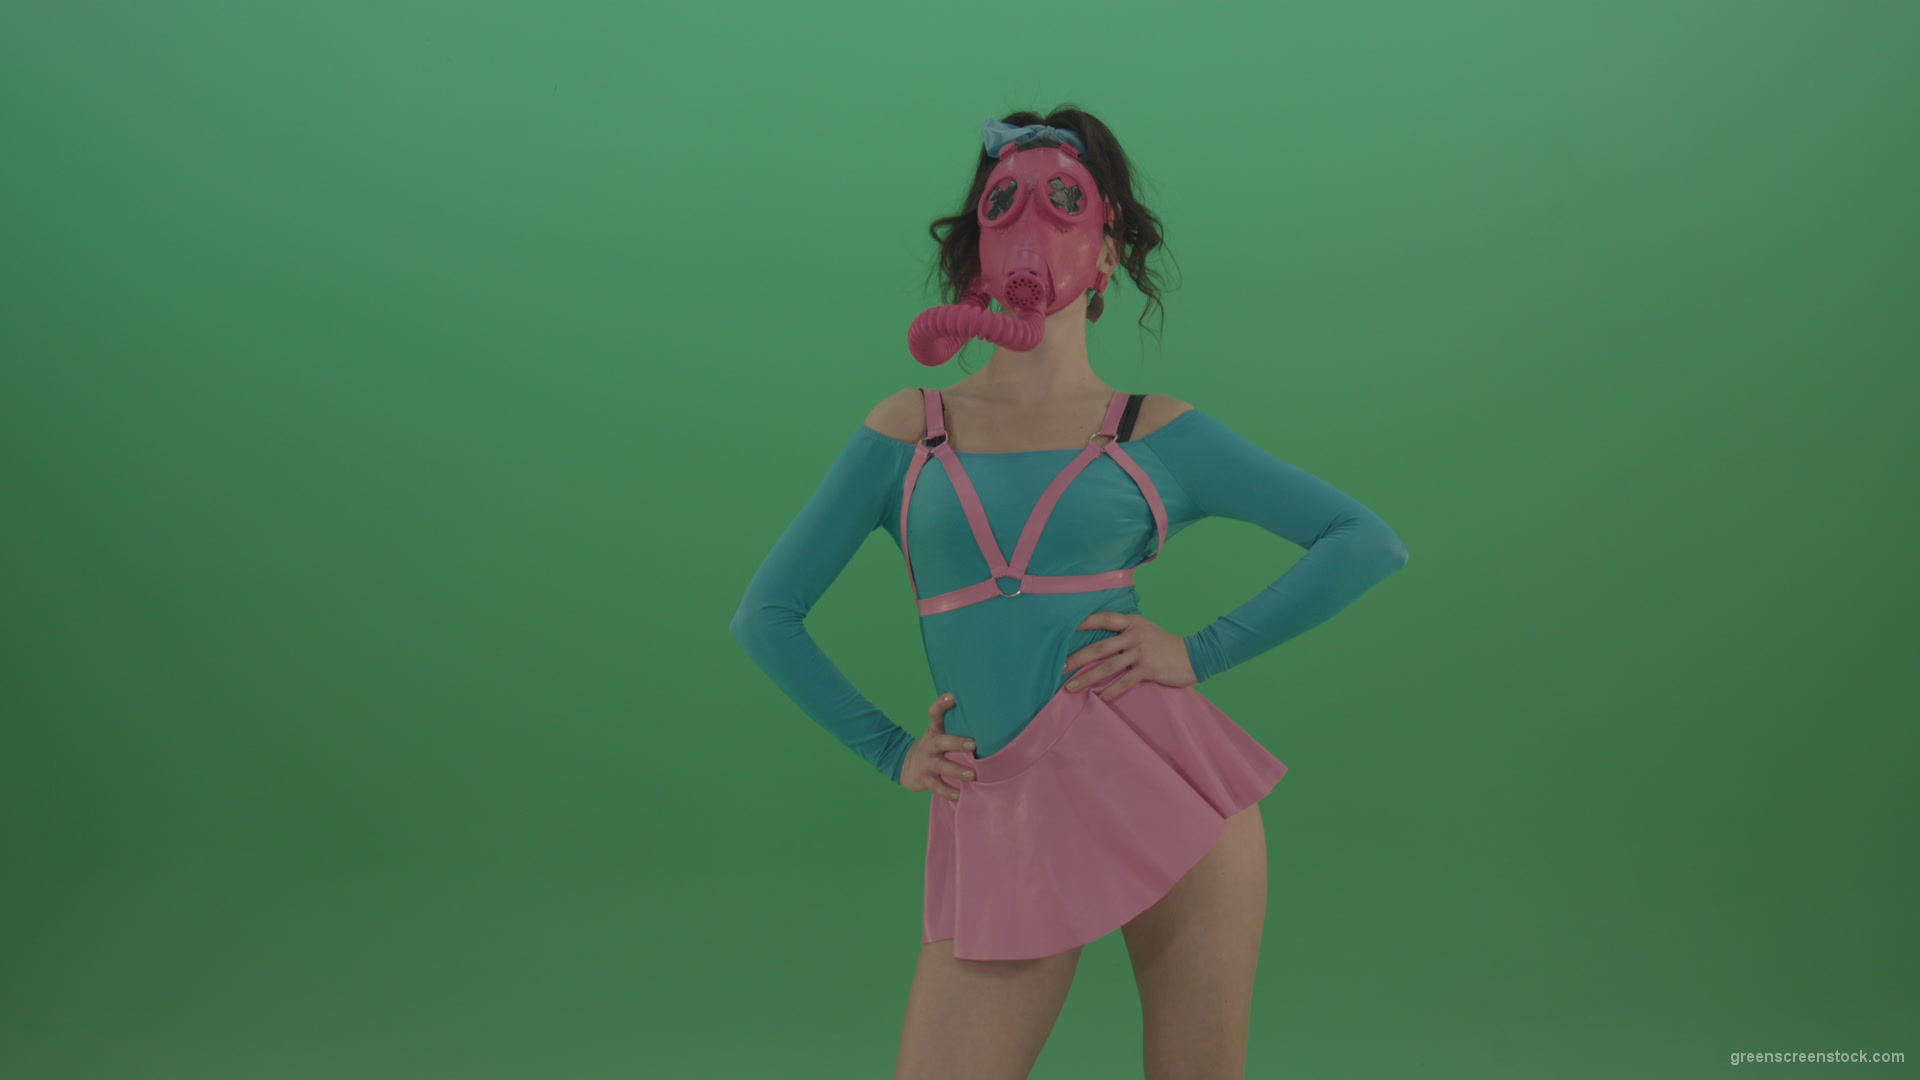 Beautiful-erotic-dance-from-a-woman-in-a-mask-in-a-pink-suit-on-green-background_007 Green Screen Stock